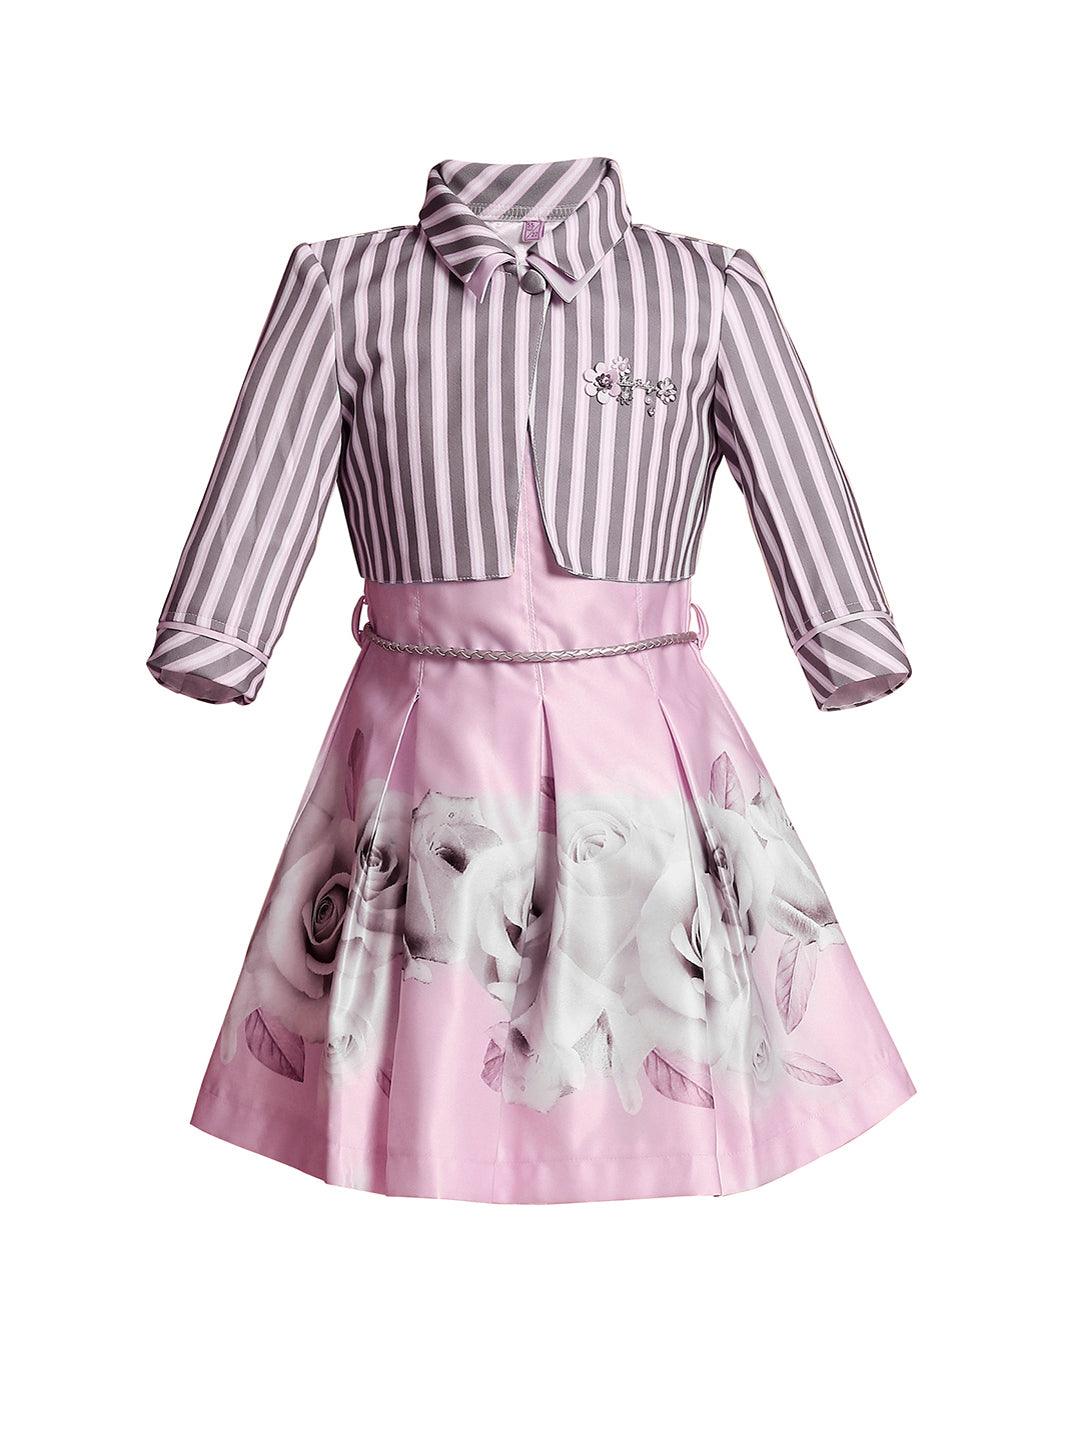 Tiny Baby Pink Colored Dress with Jacket - 1956 - TINY BABY INDIA shop.tinybaby.in